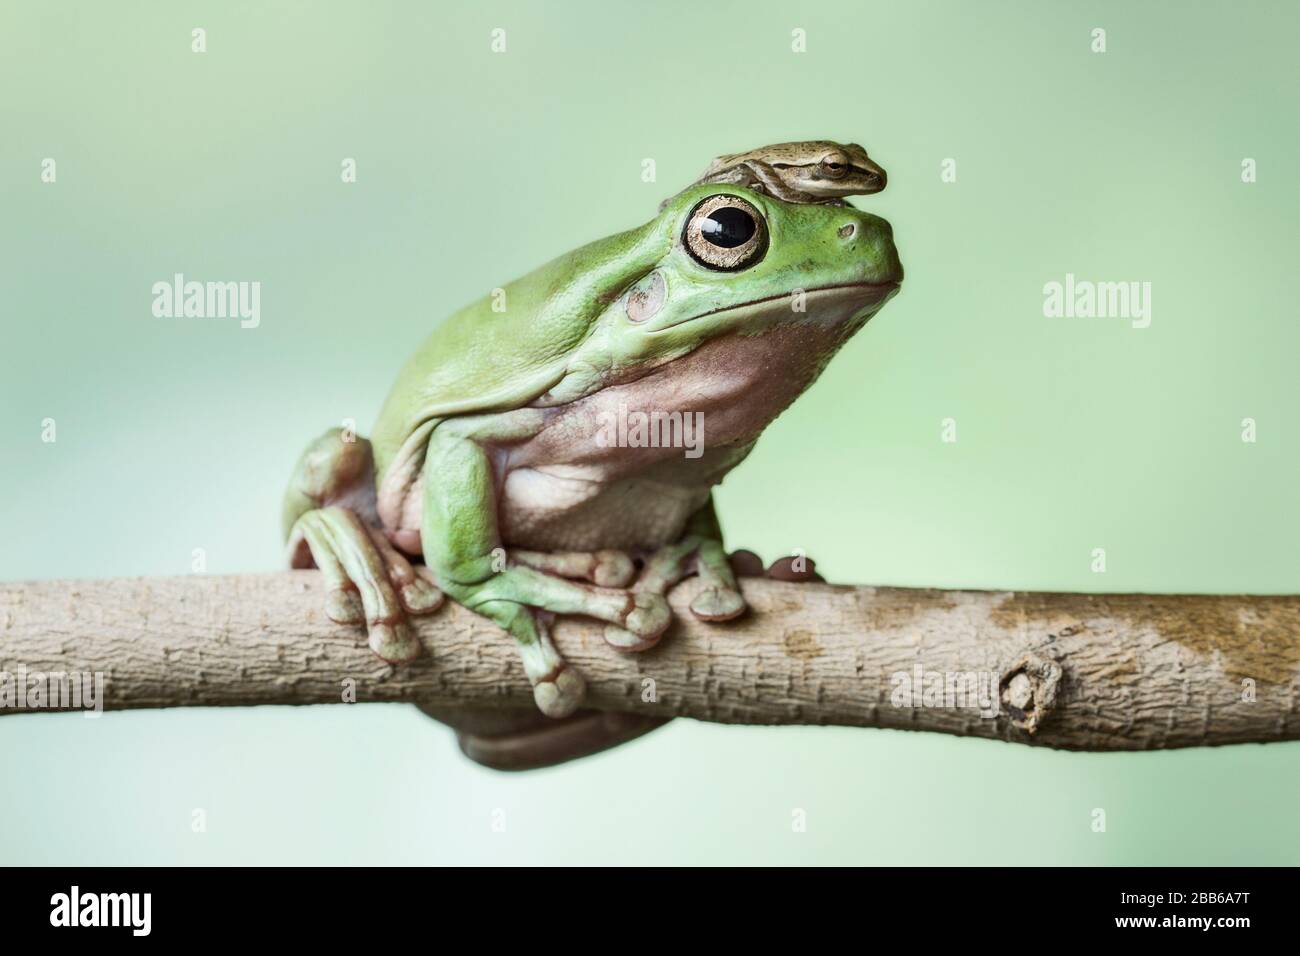 Miniature frog sitting on top of a dumpy tree frog on a branch, Indonesia Stock Photo